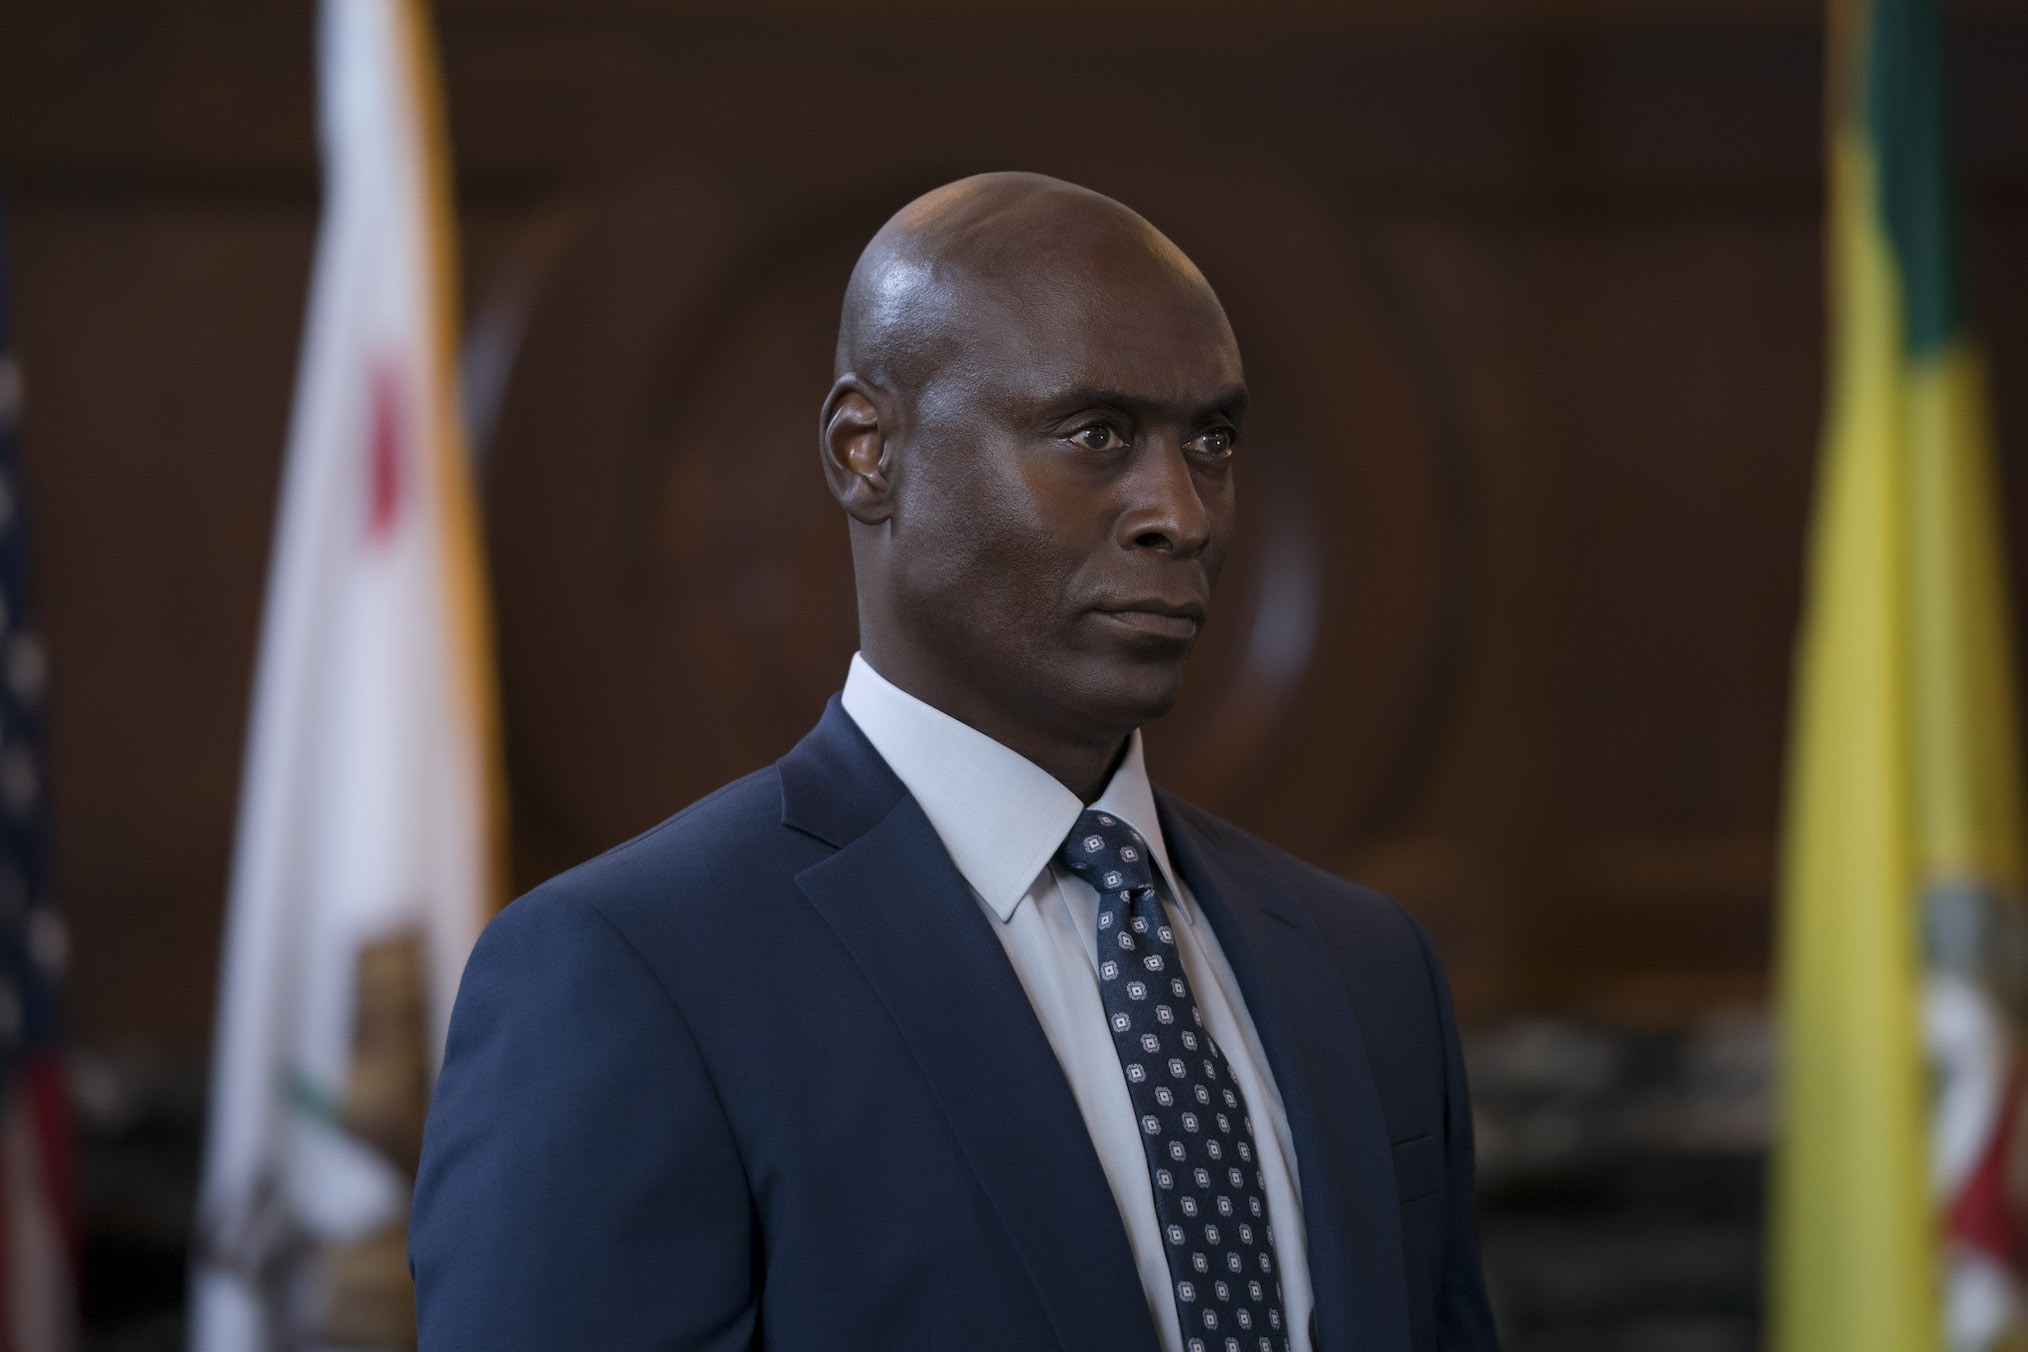 Lance Reddick On A Timely Bosch Season 4 The Wire Alum He